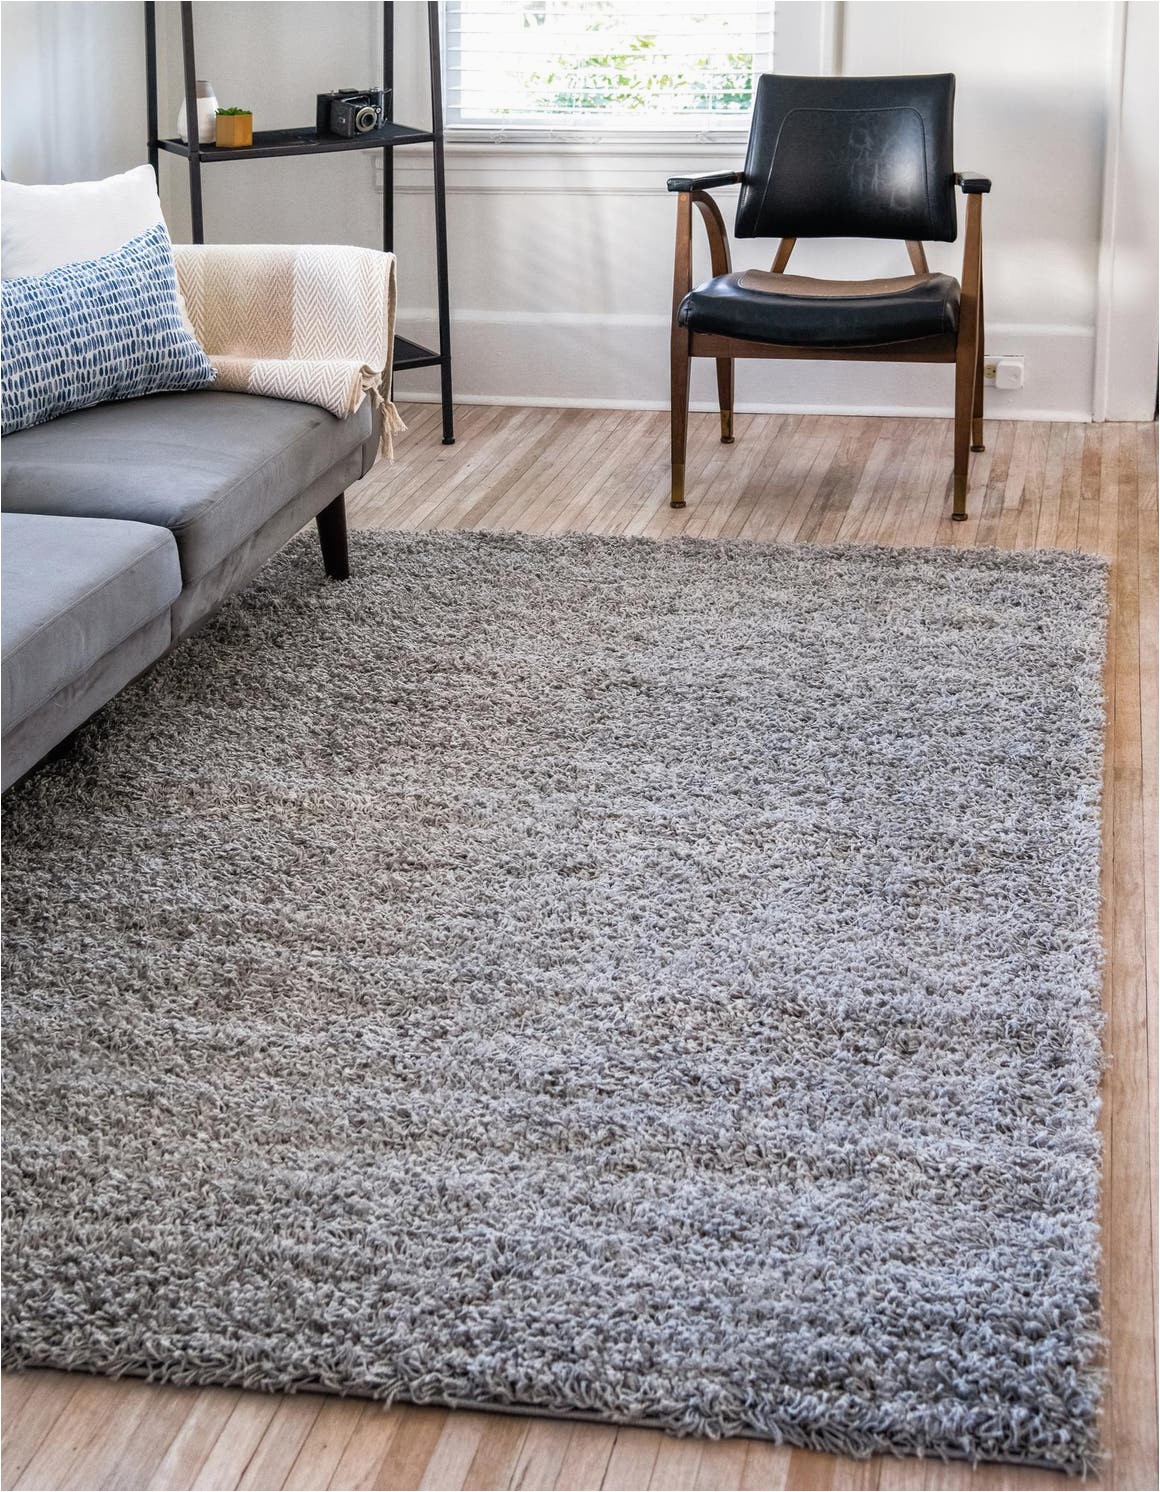 Hgtv area Rugs for Sale Can You Believe these area Rugs are Under $100